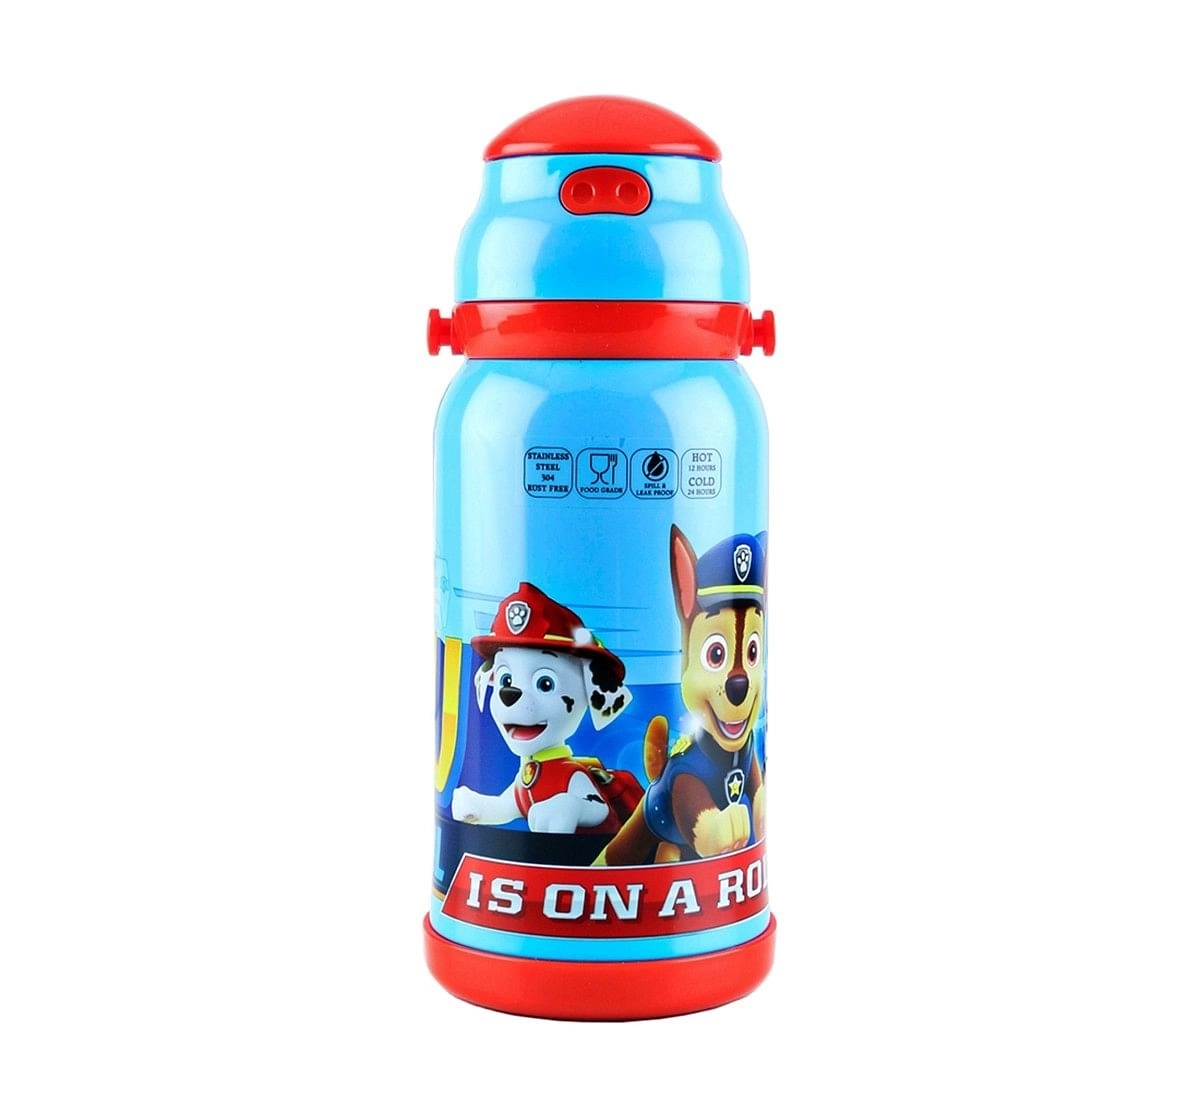 Paw Patrol Paw Patrol Steel Inner Water Bottle 460 ml,Quirky Soft Toys for Kids age ,3Y+ - 21 Cm 